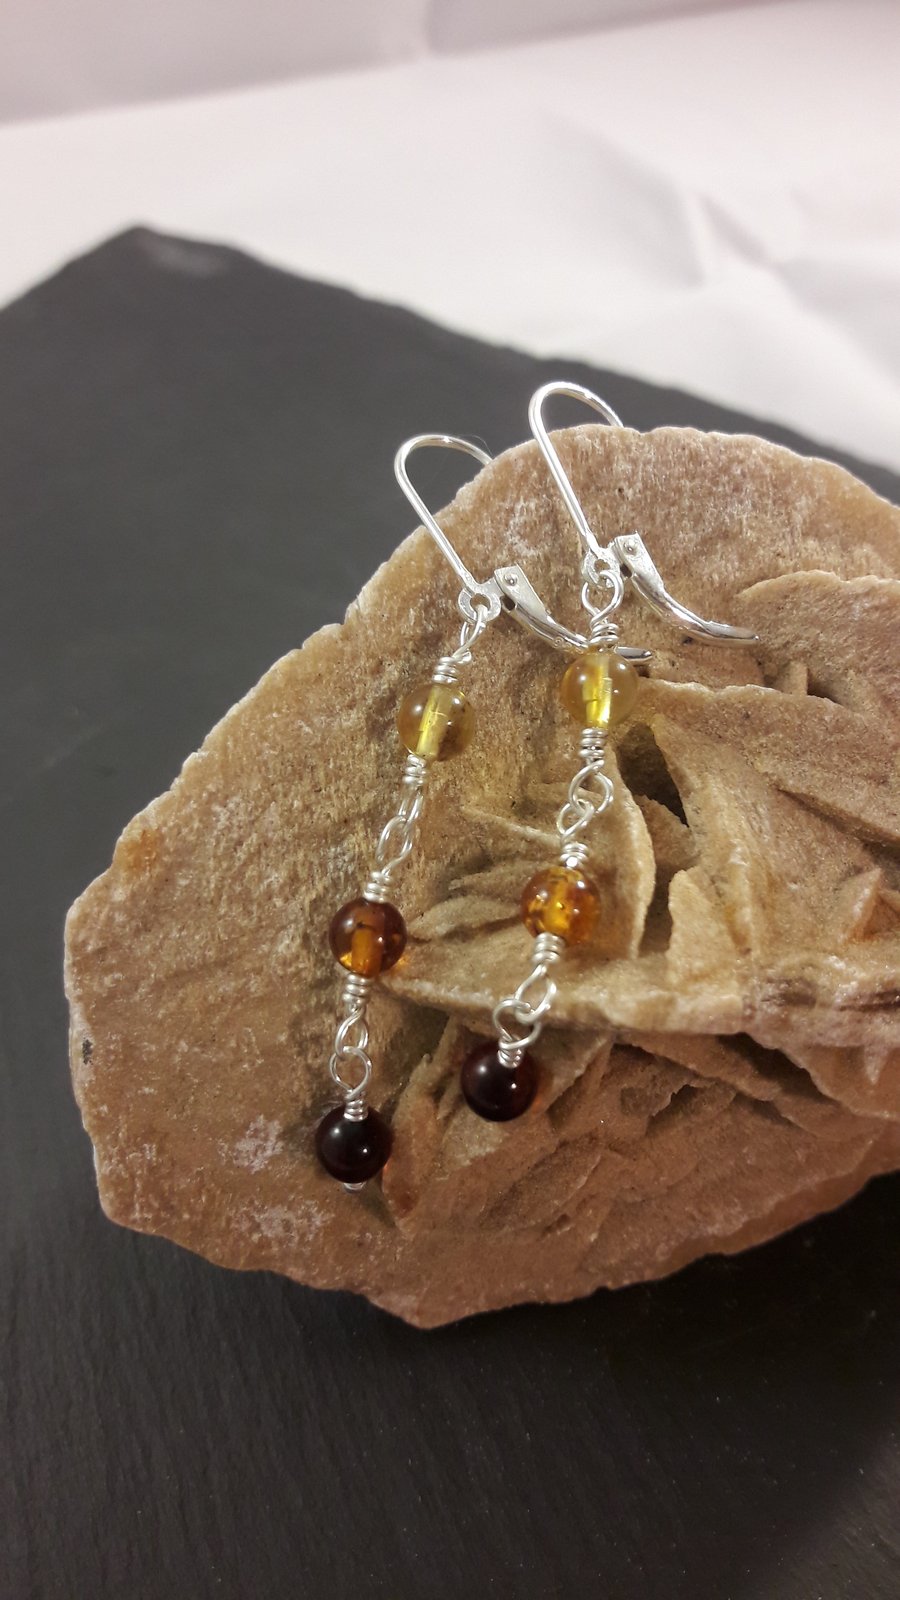 Tricolour Baltic Amber and Sterling Silver Long Earrings